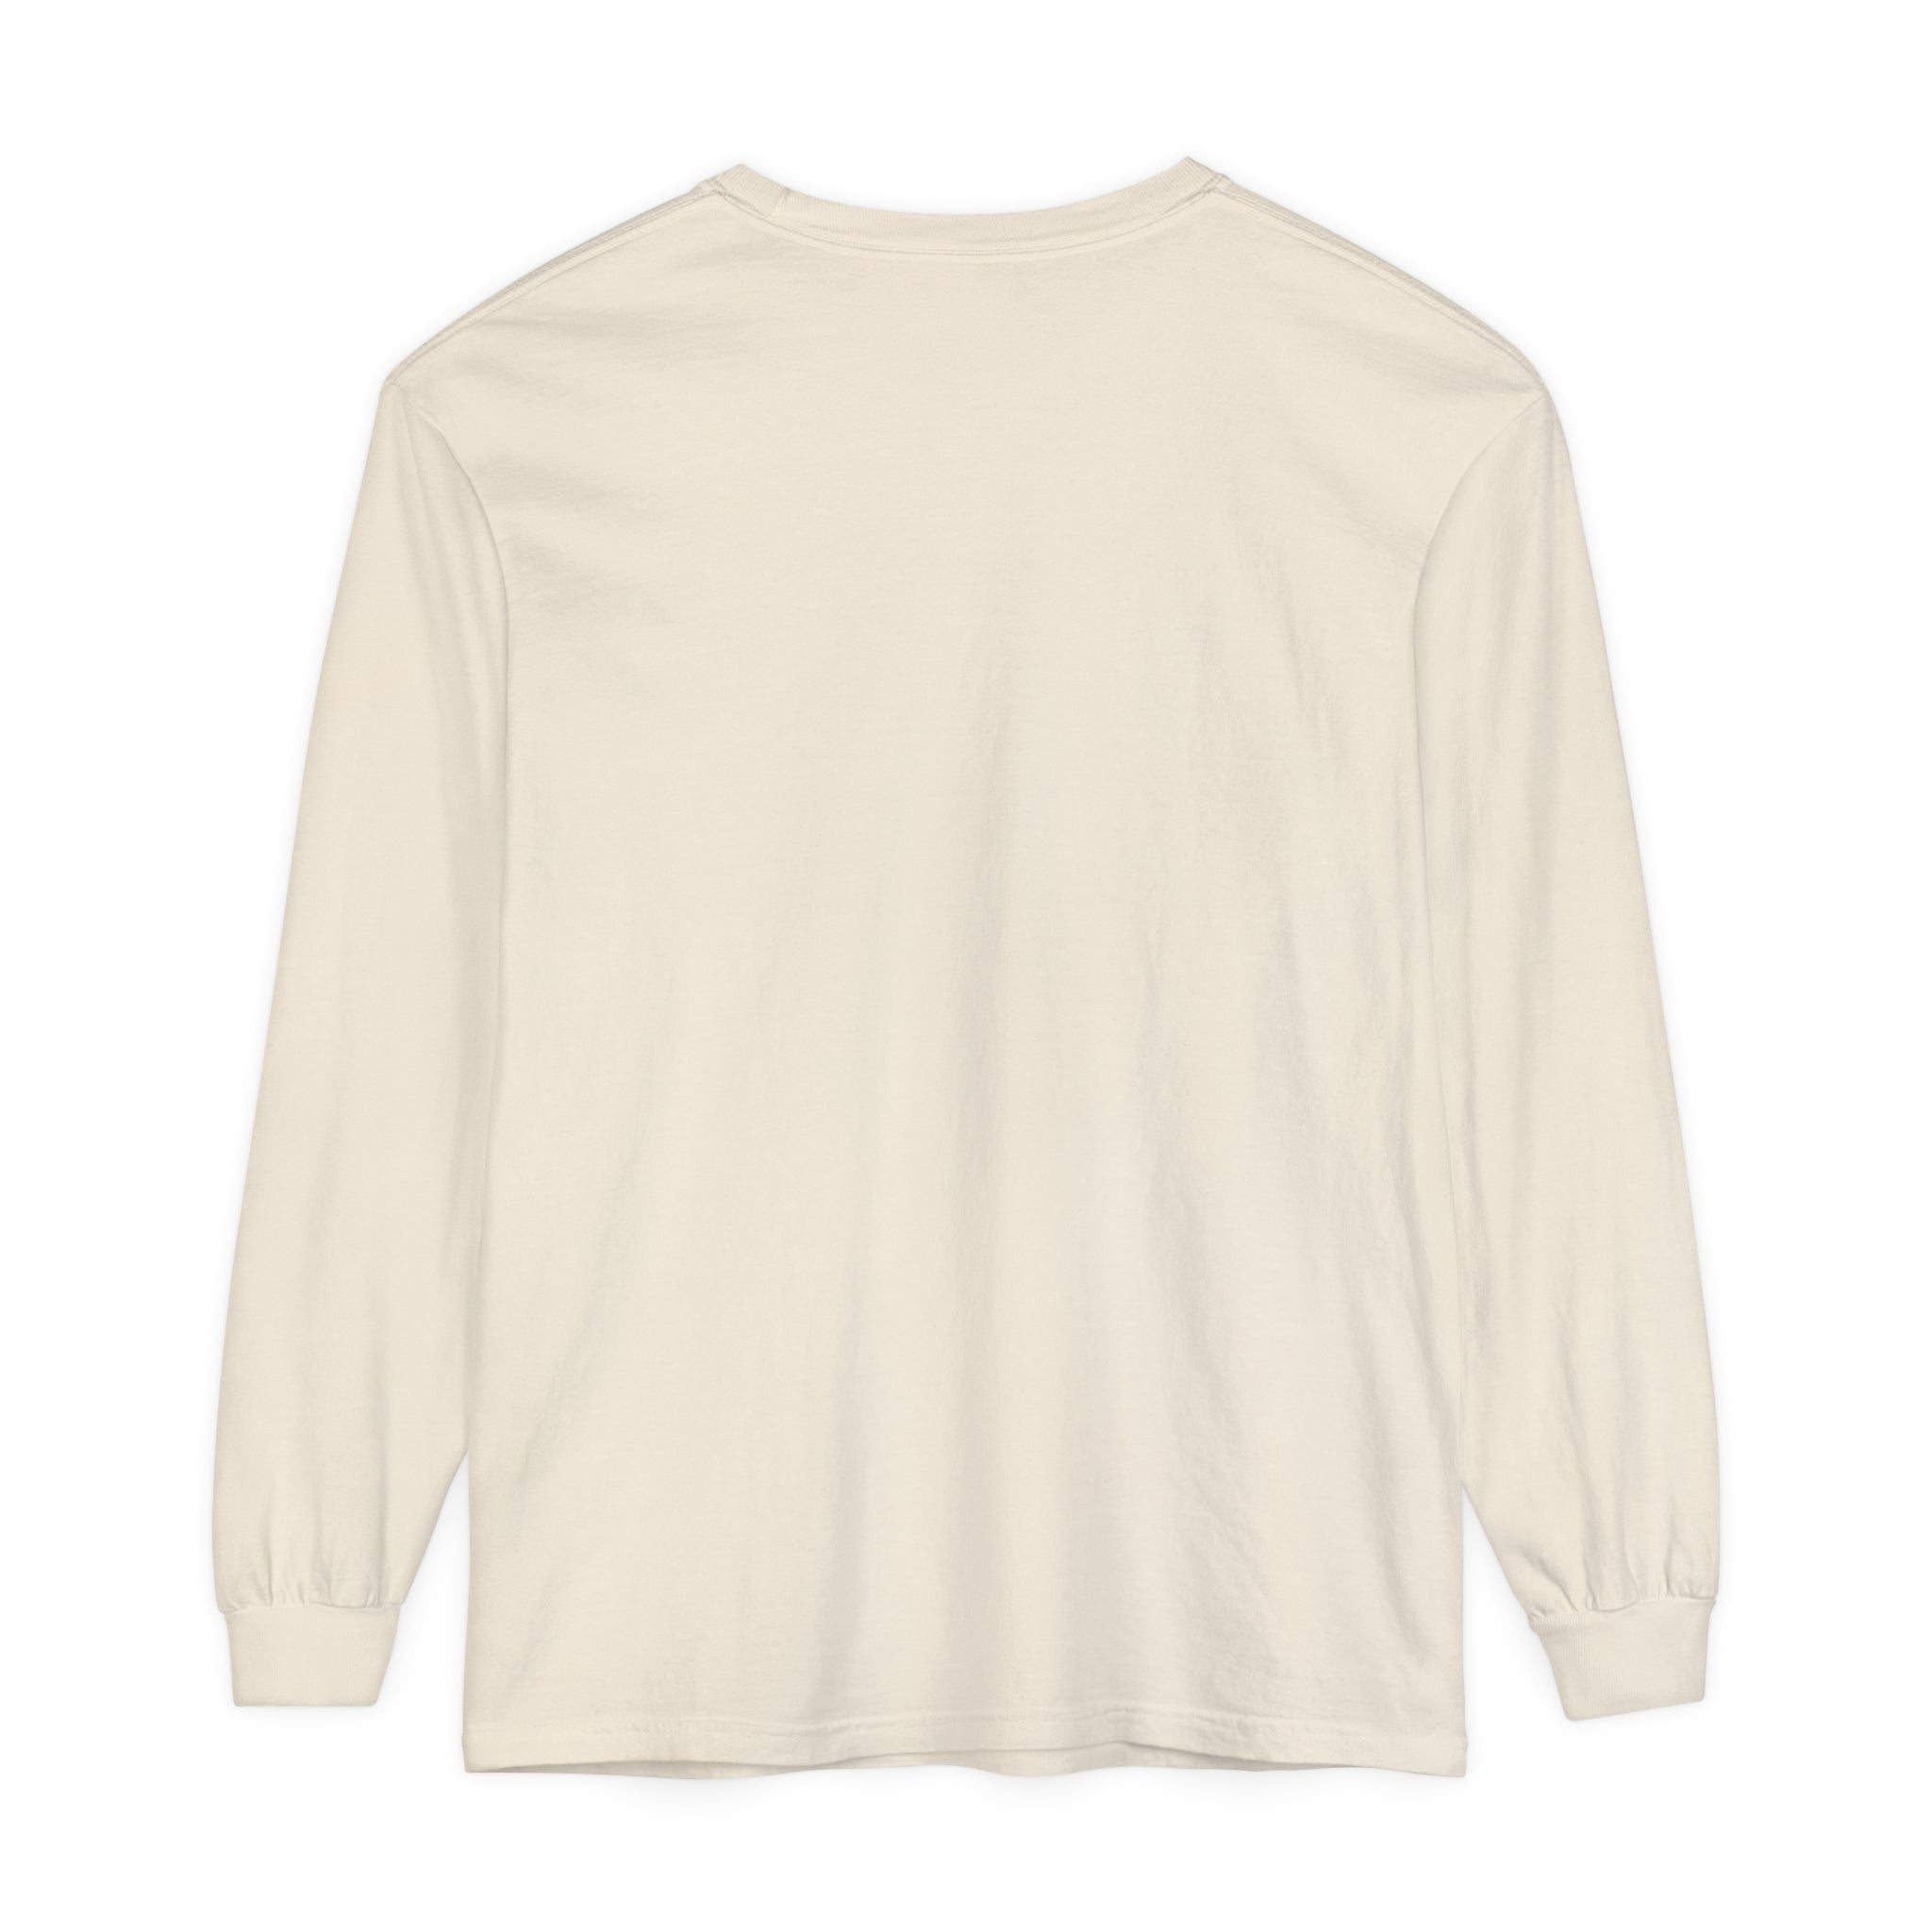 All Staff Collegiate Long Sleeve in Ivory